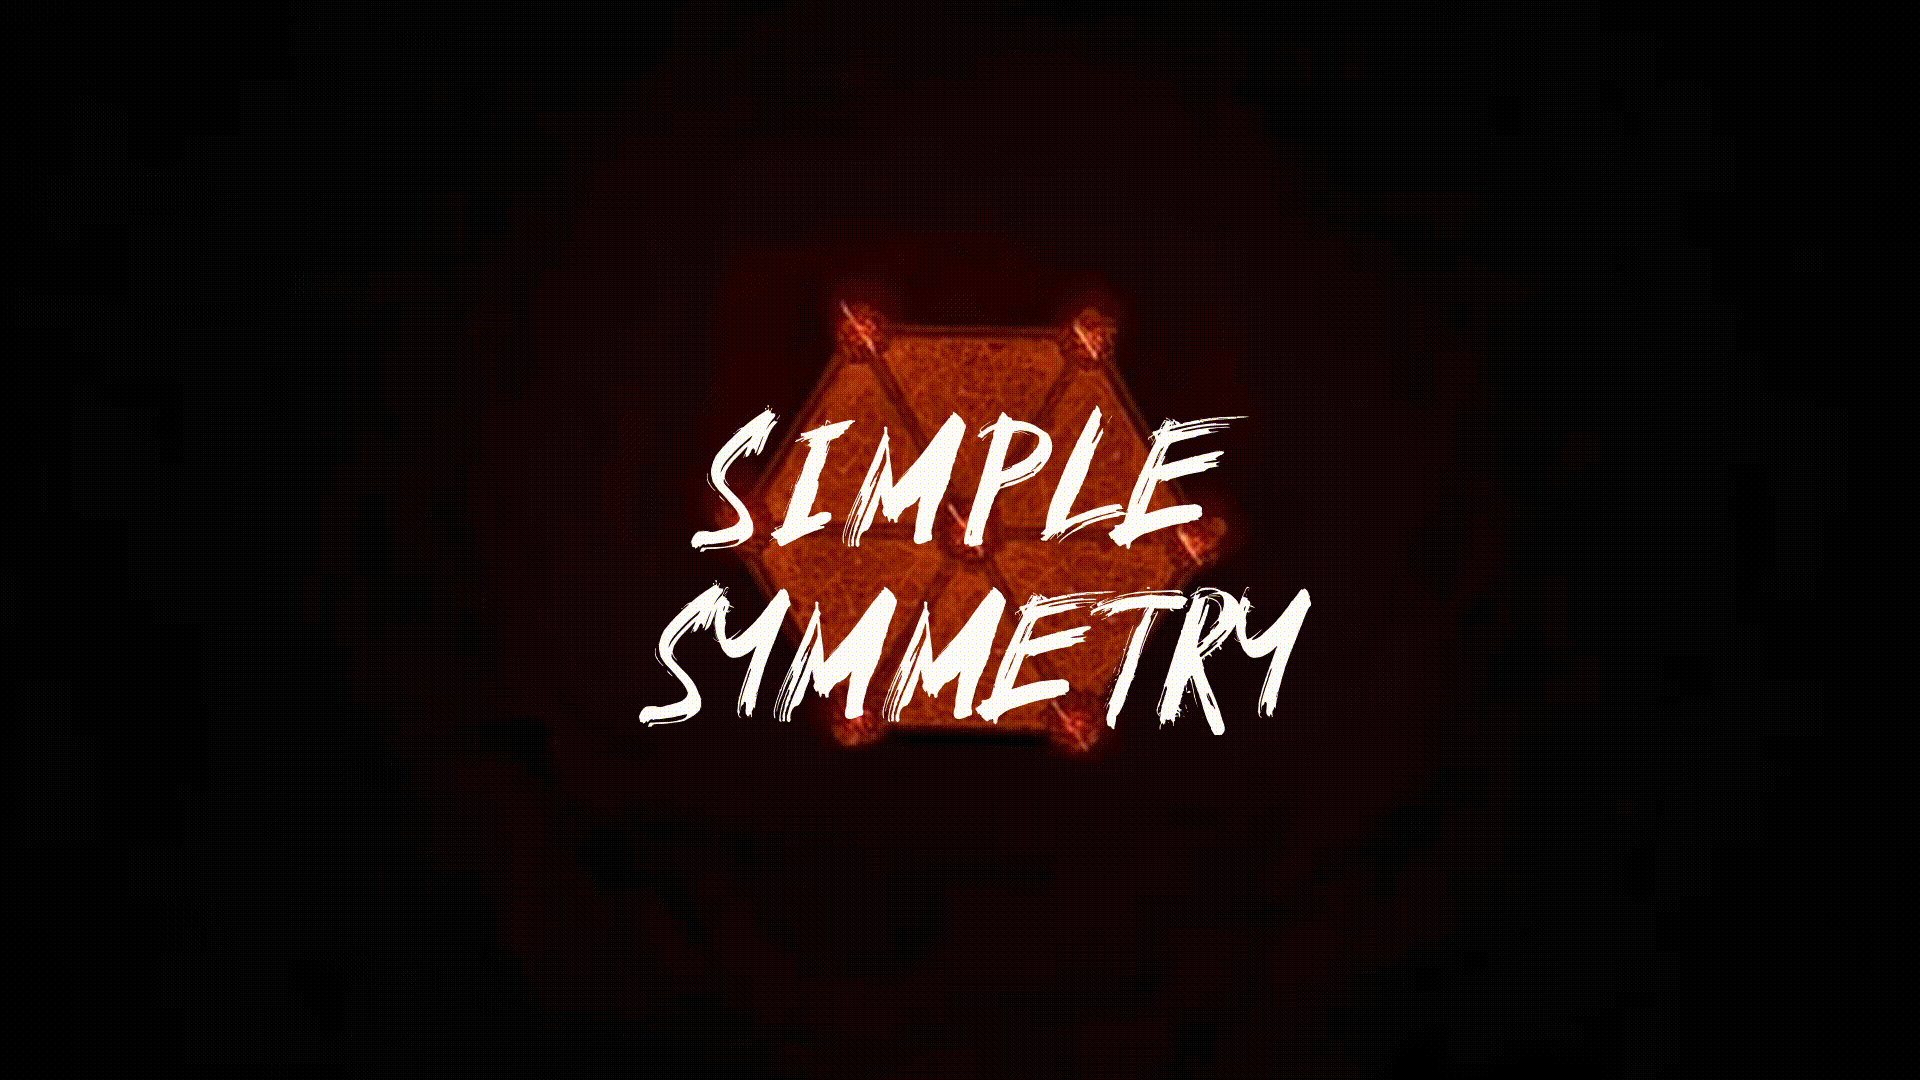 More information about "Simple Symmetry"